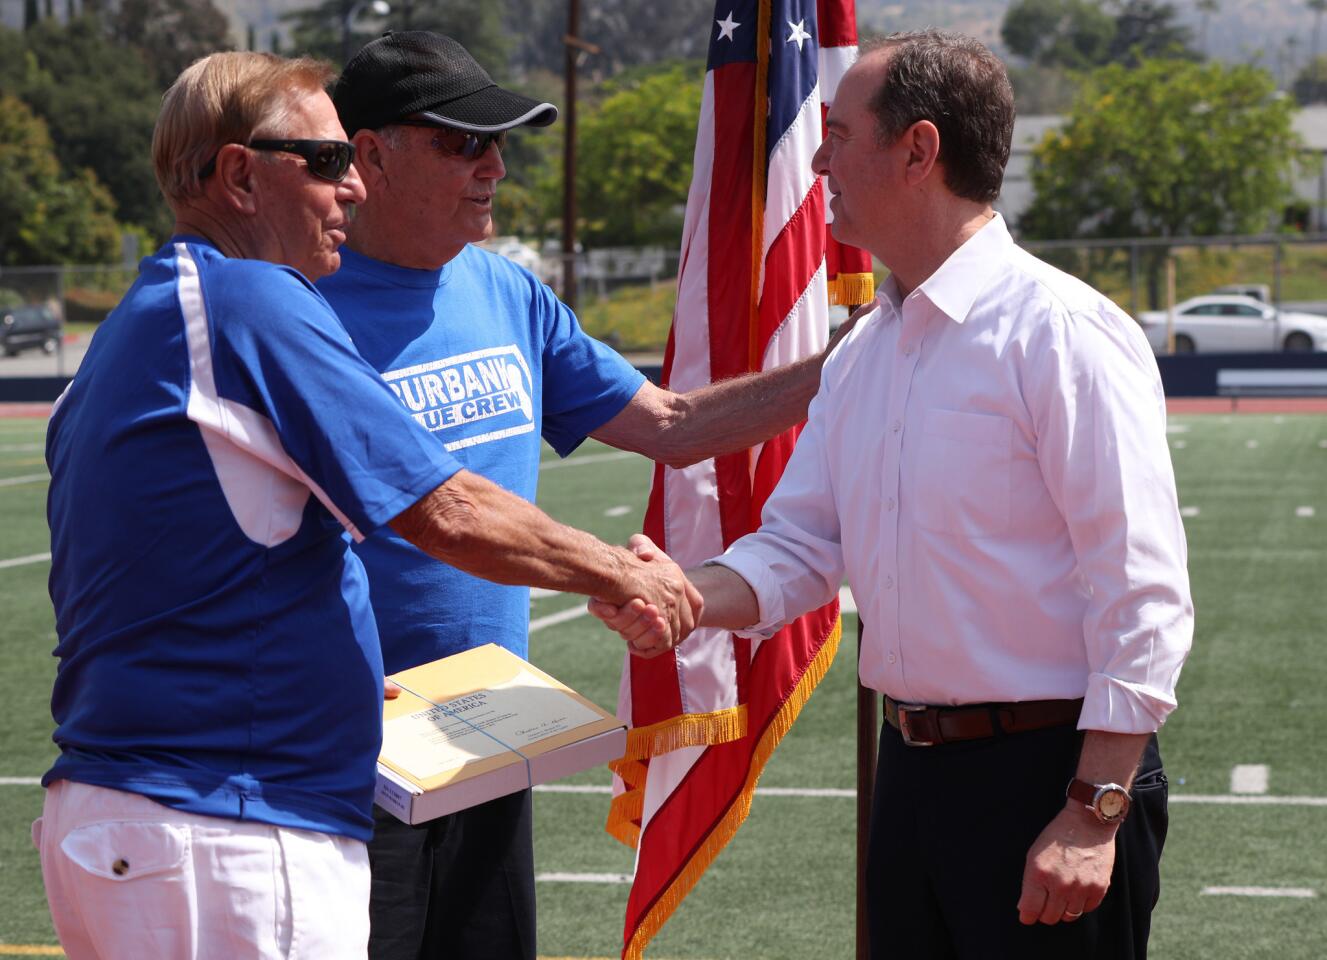 Photo Gallery: Former coaches Kemp, Kallem honored at Burbank High